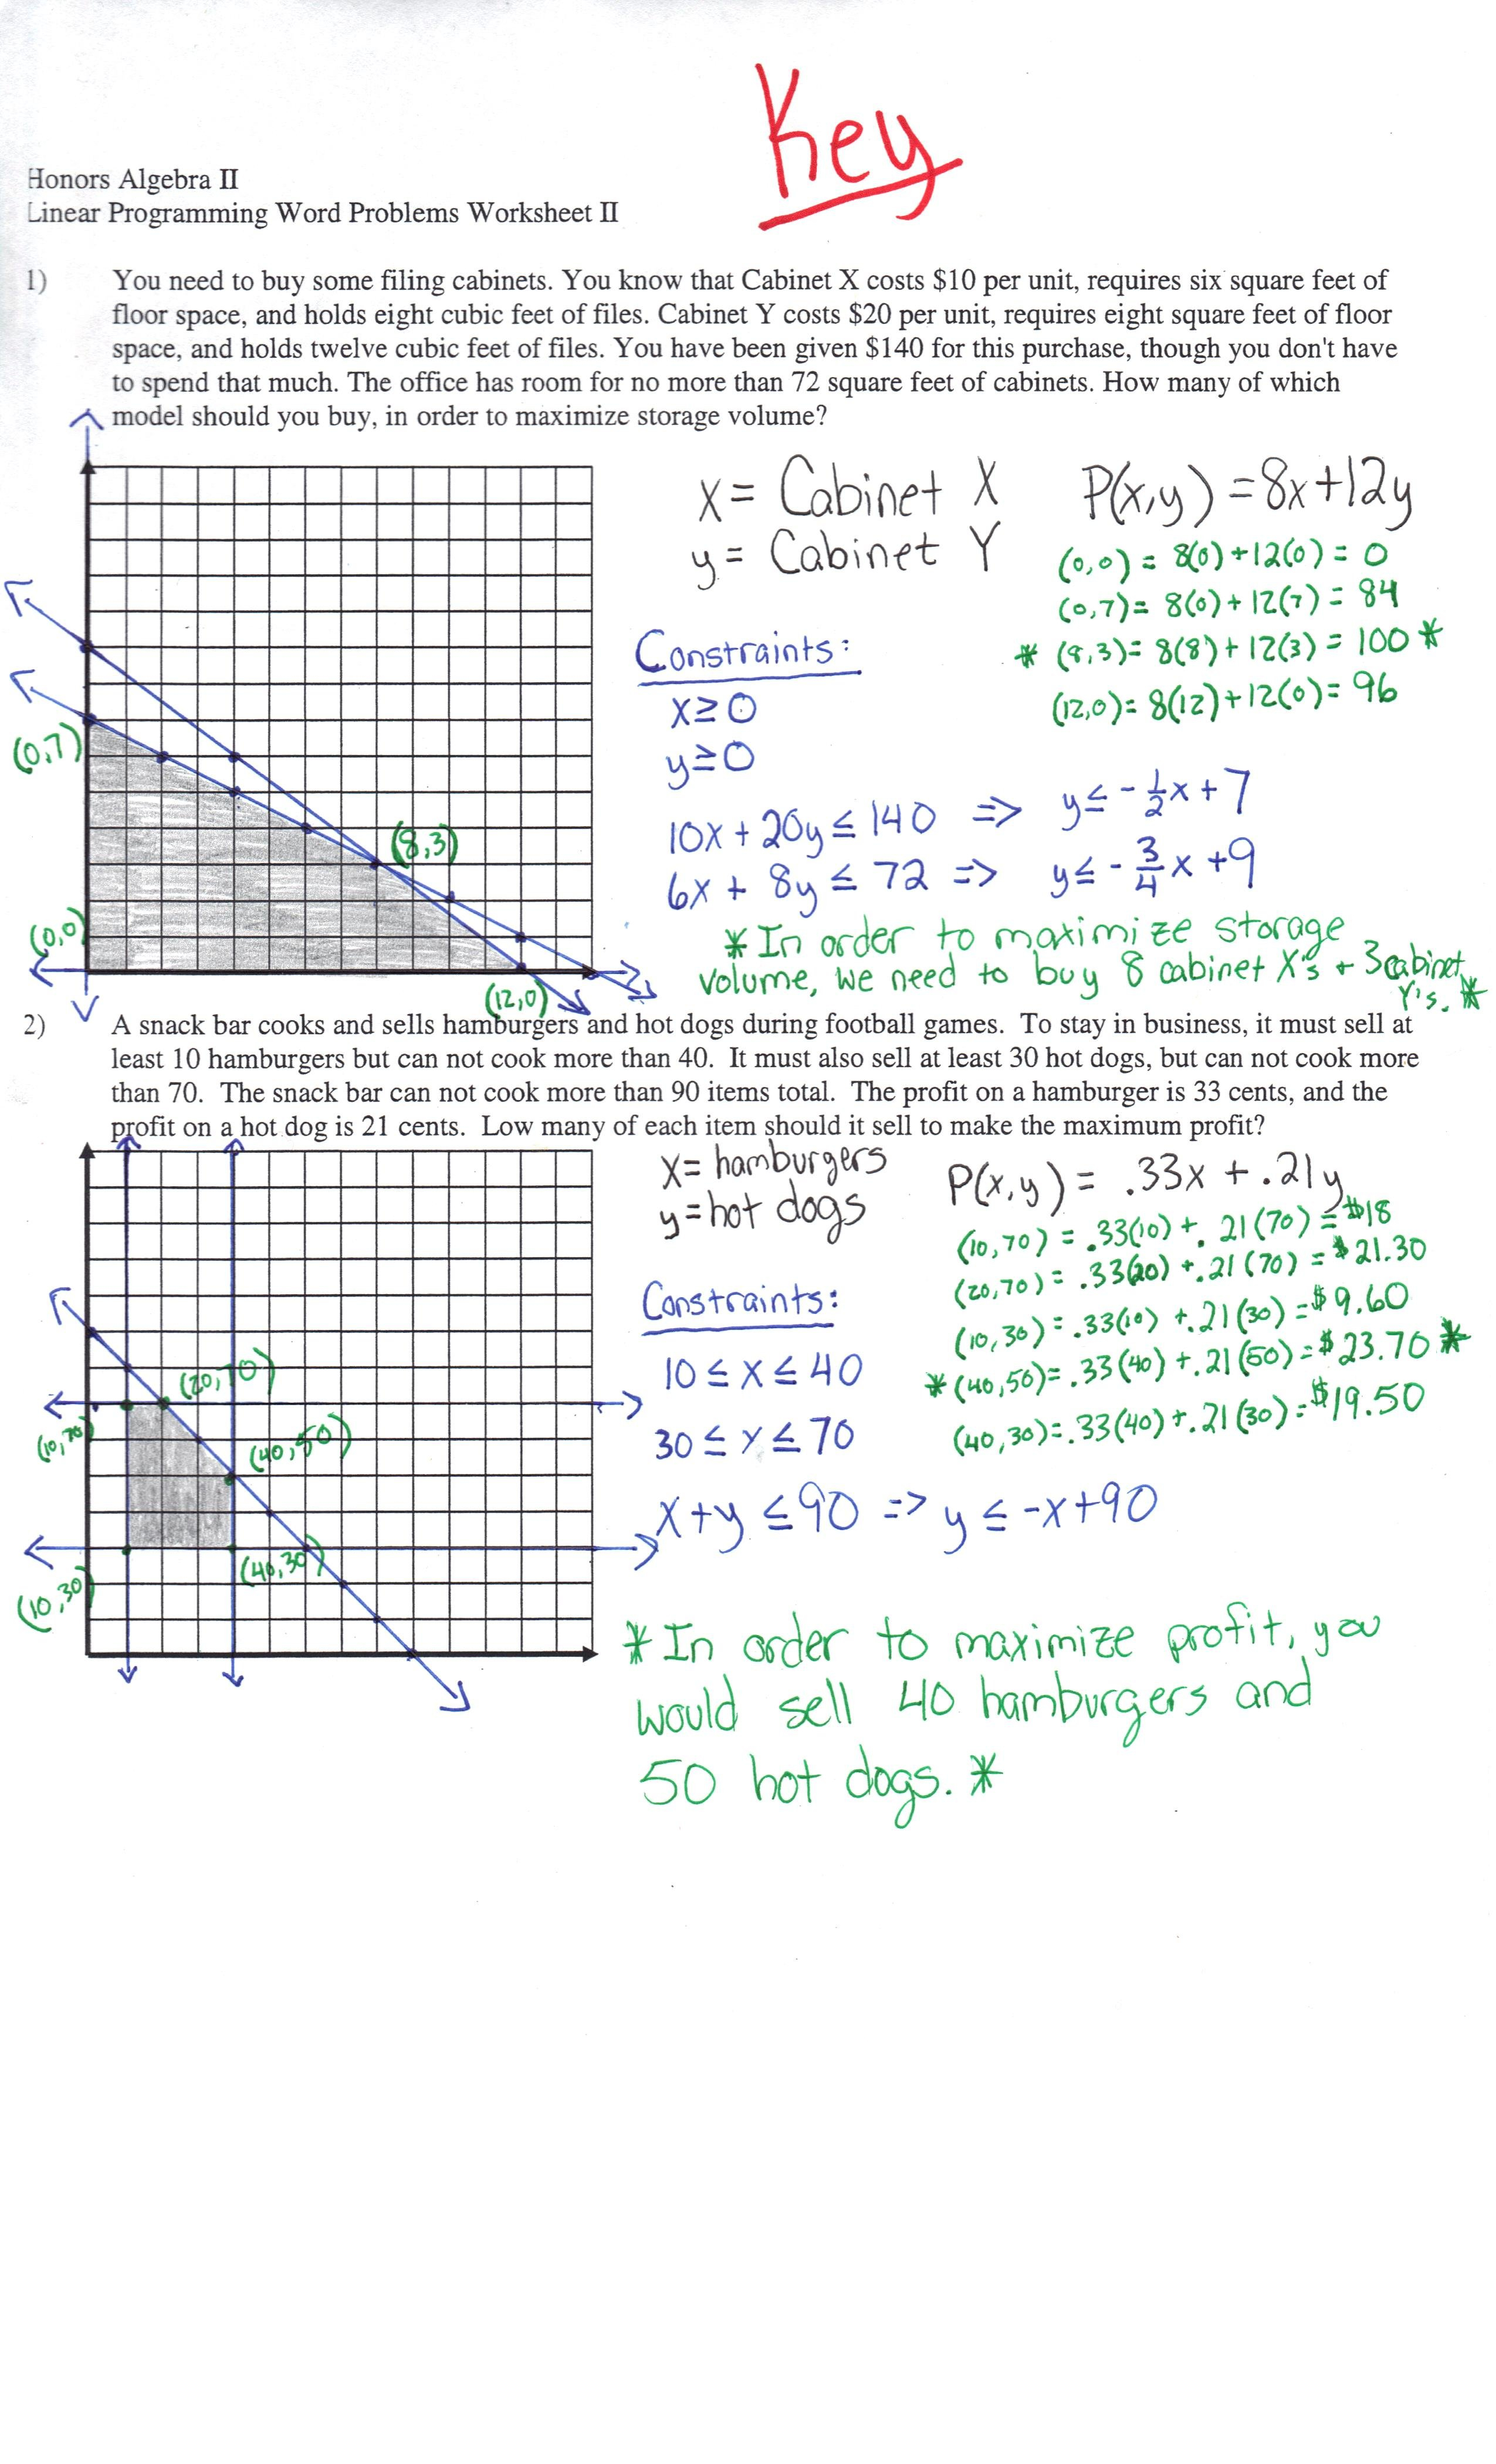 Linear Programming Worksheet And Answers The Best Worksheets Image In Linear Programming Worksheet Honors Algebra 2 Answers